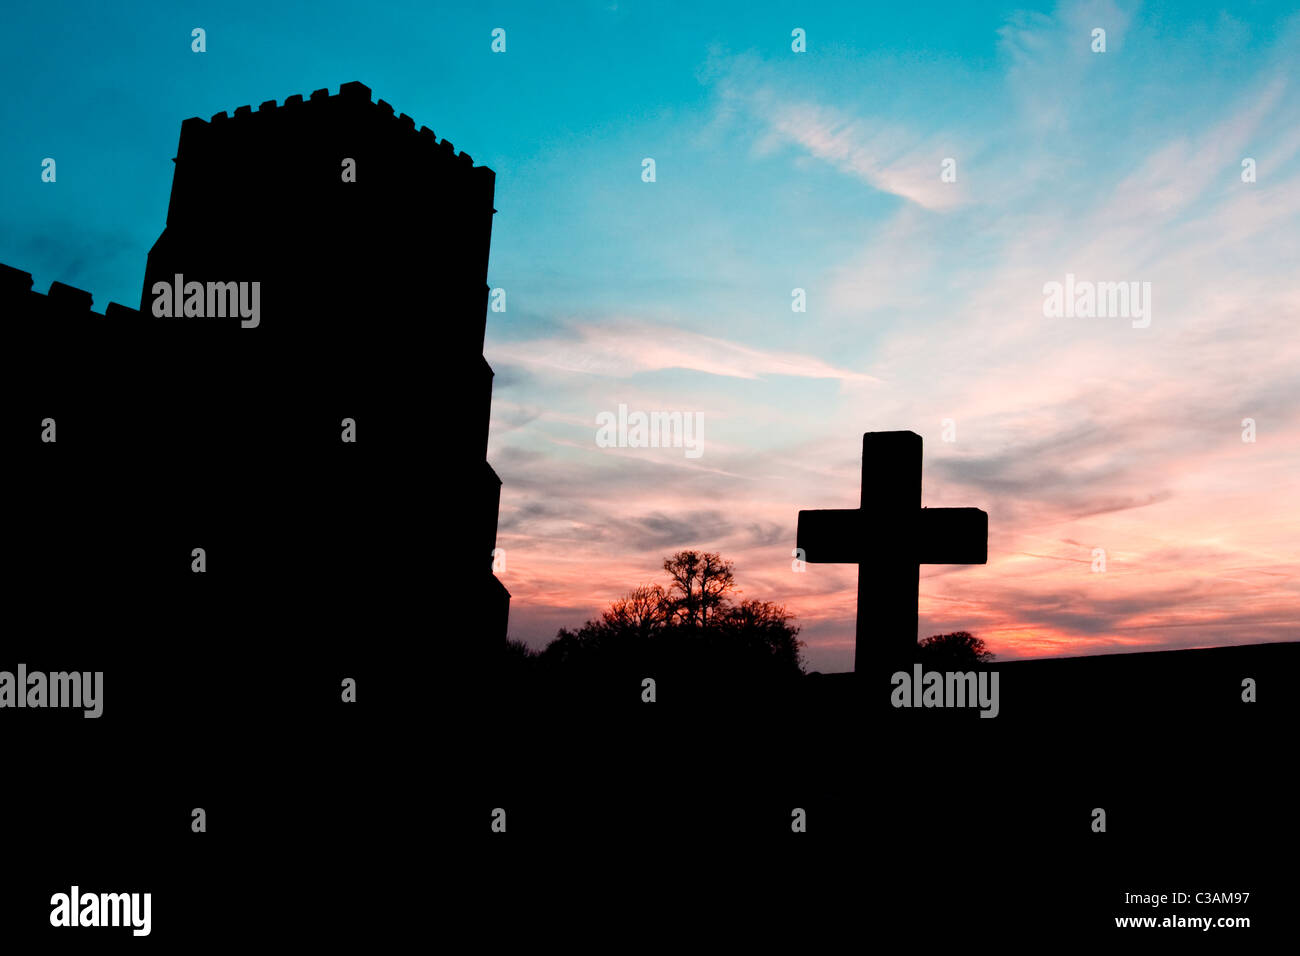 Silhouette of a cross against a colorful sky at dusk in the churchyard of St Mary's at Dalham in Suffolk Stock Photo